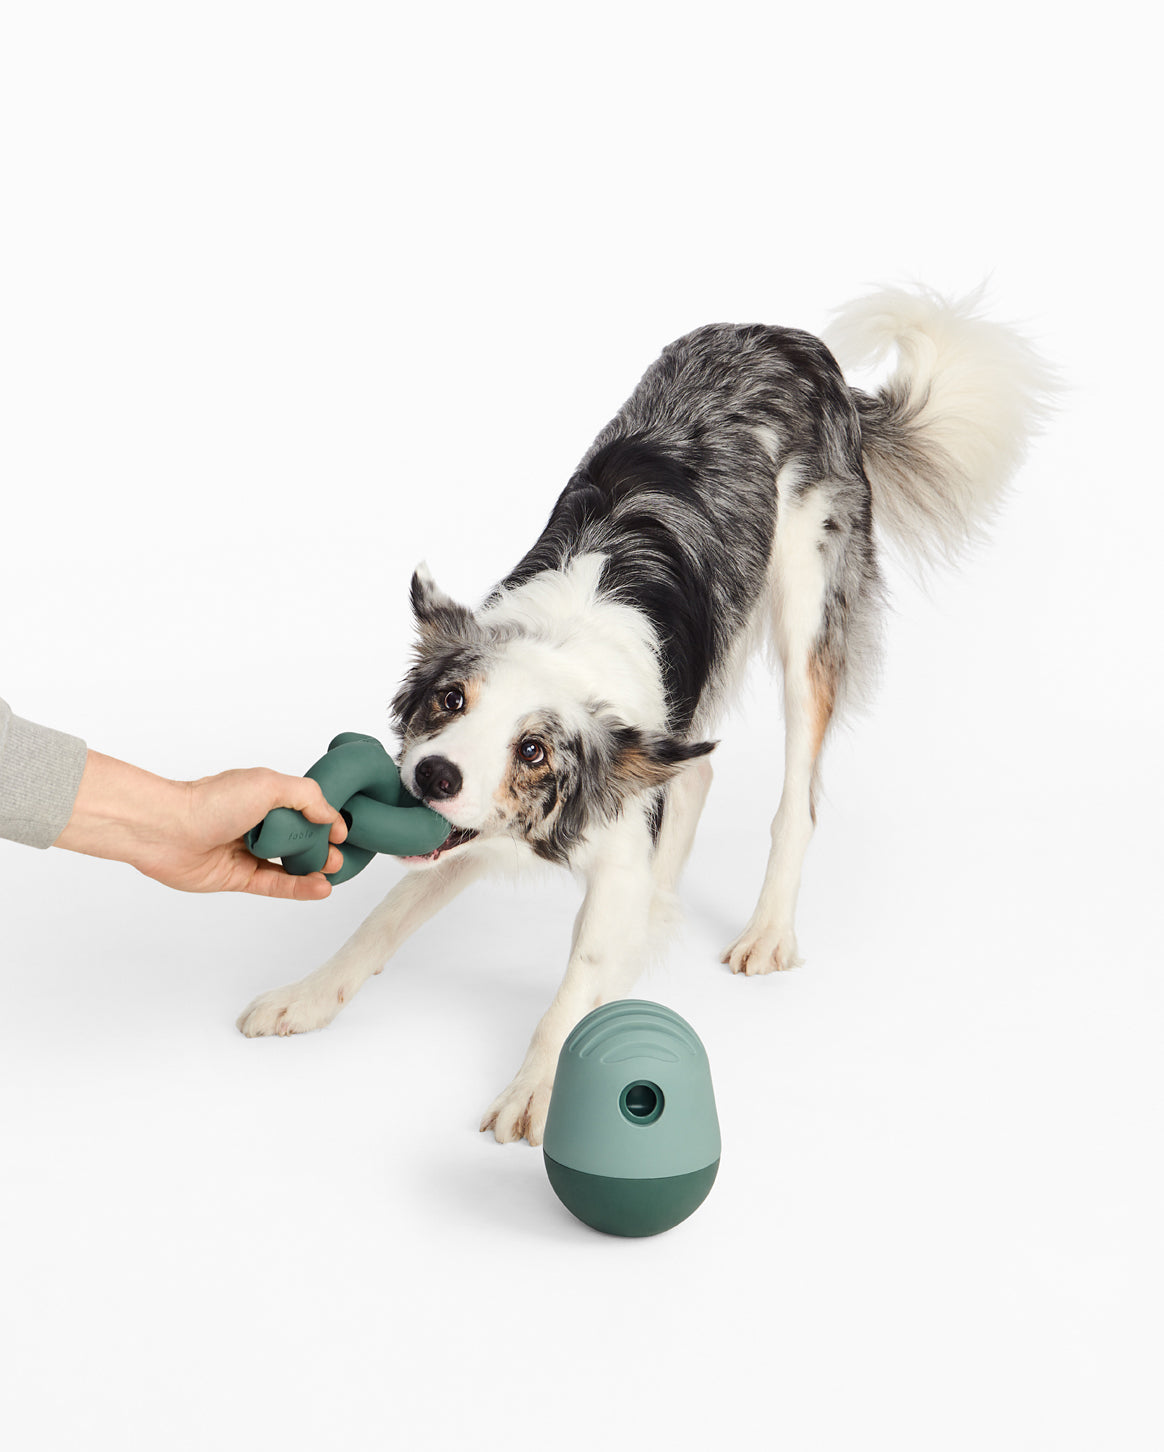 Fable  The Game - Best Dog Enrichment Toy & Feeder In One